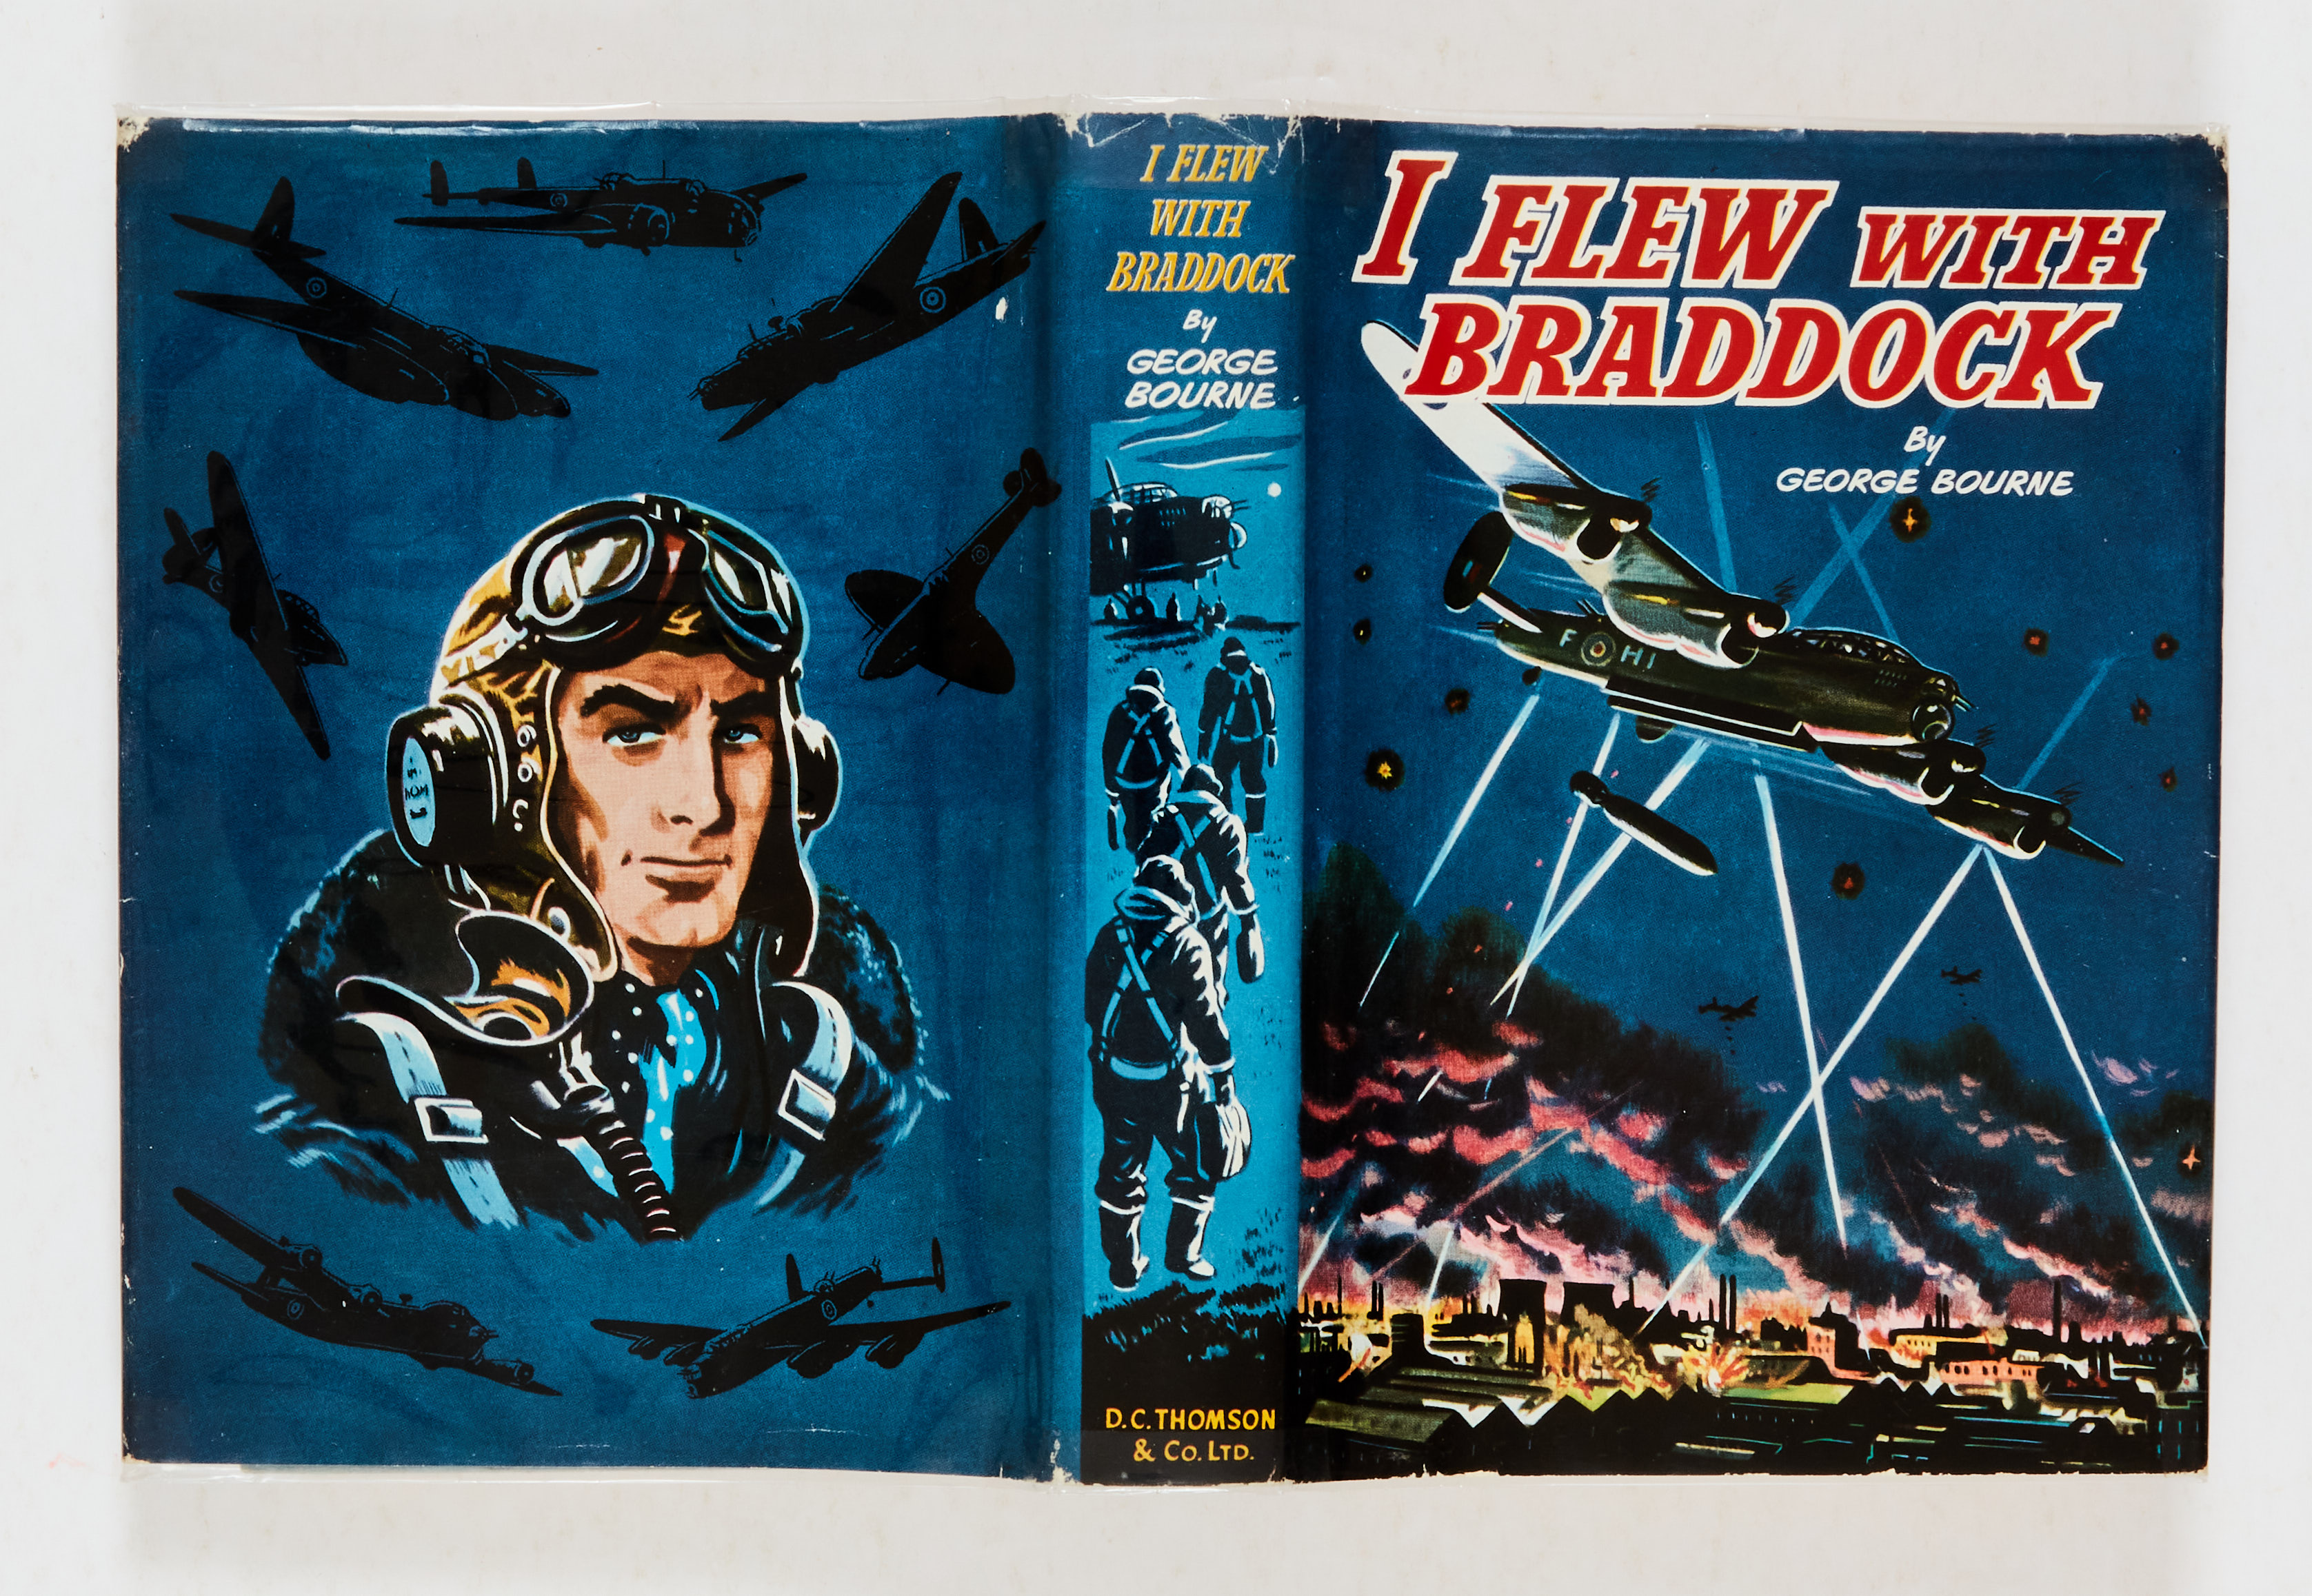 I Flew With Braddock book (1958 D.C. Thomson) by George Bourne with 18 illustrations, dj with